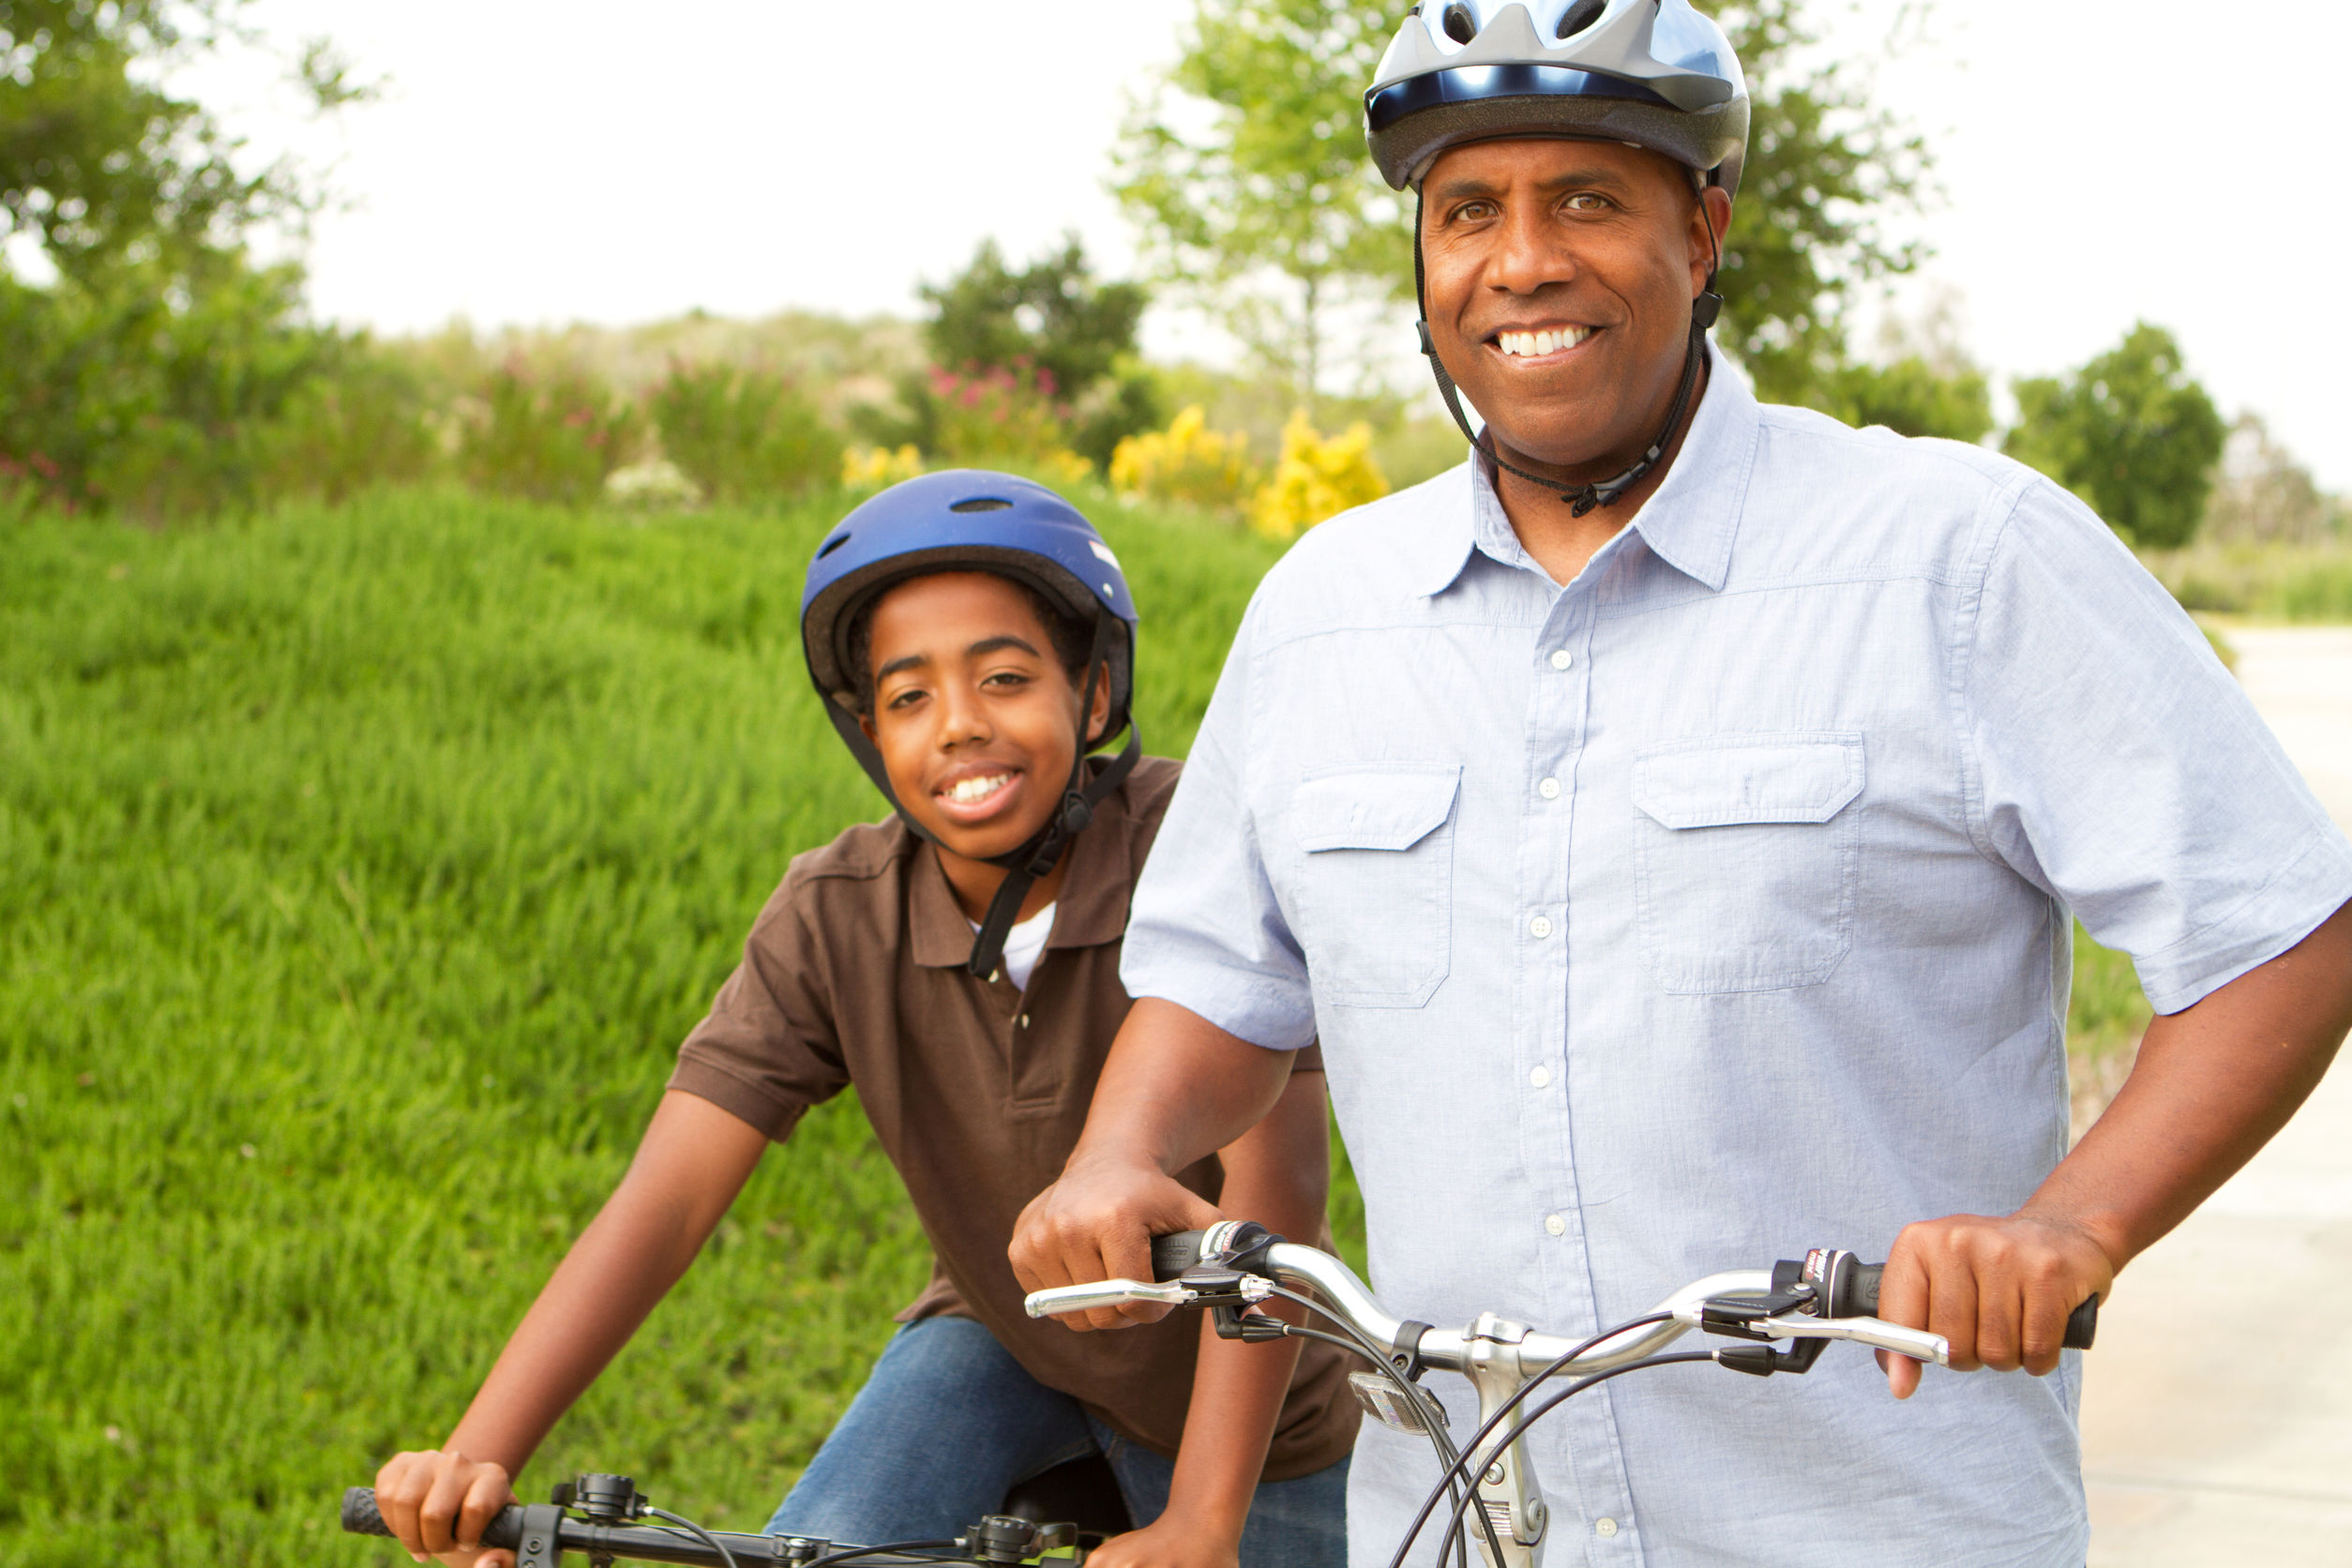 This is a photo of a father and son riding bikes.